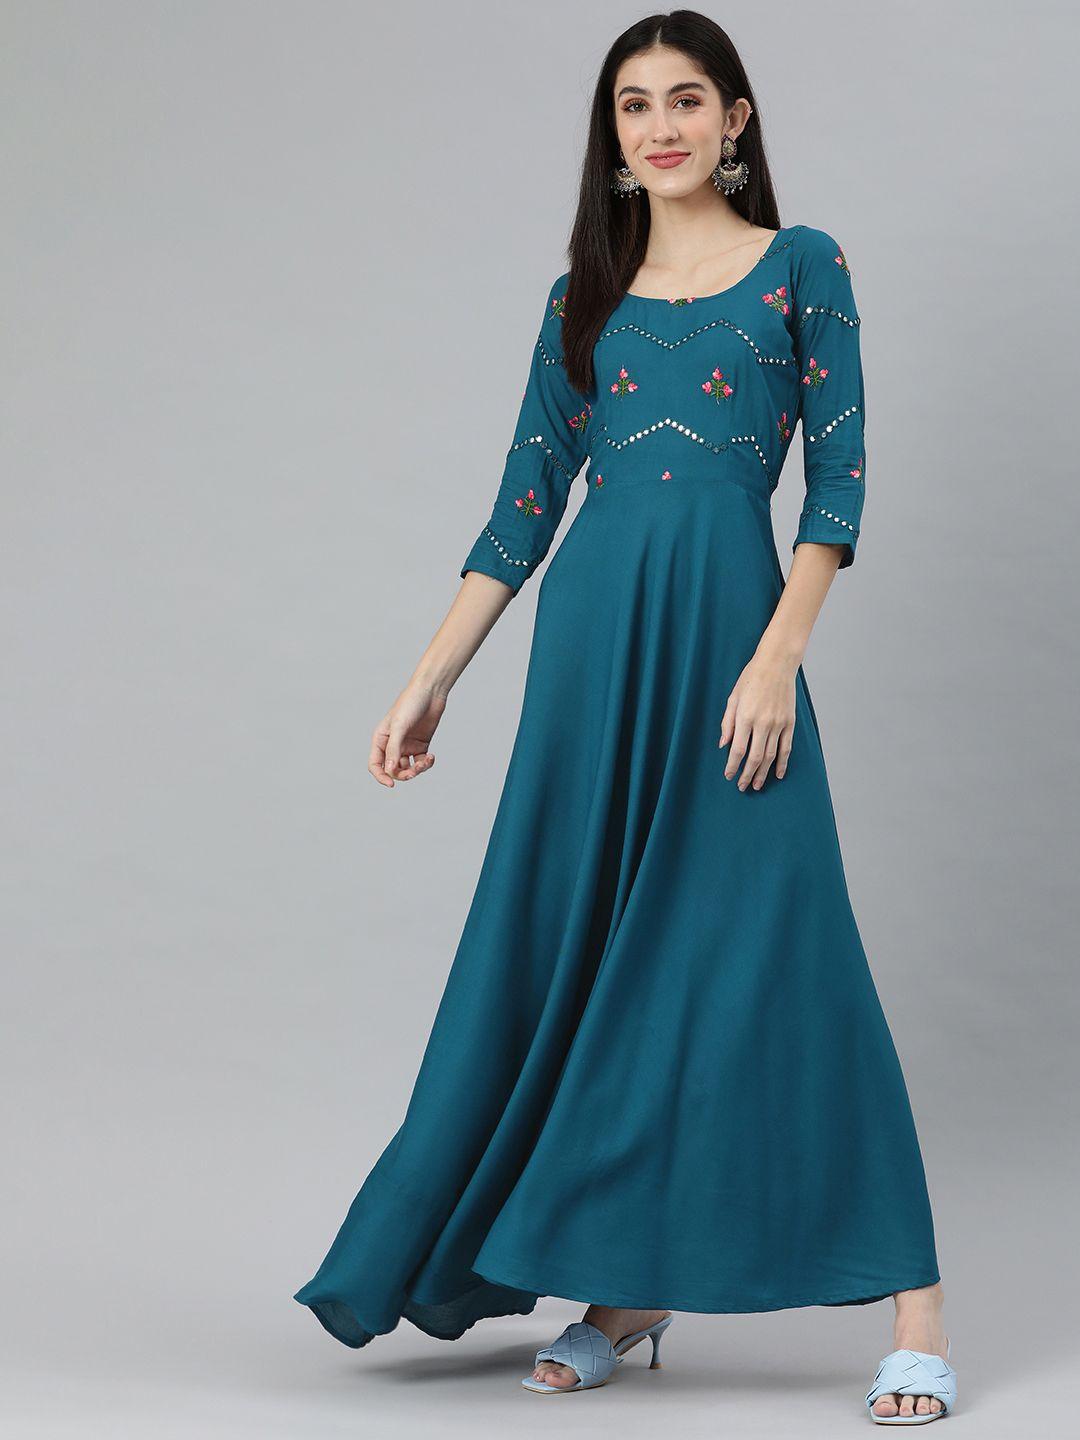 swishchick-teal-blue-solid-ethnic-maxi-dress-with-embroidered-detail